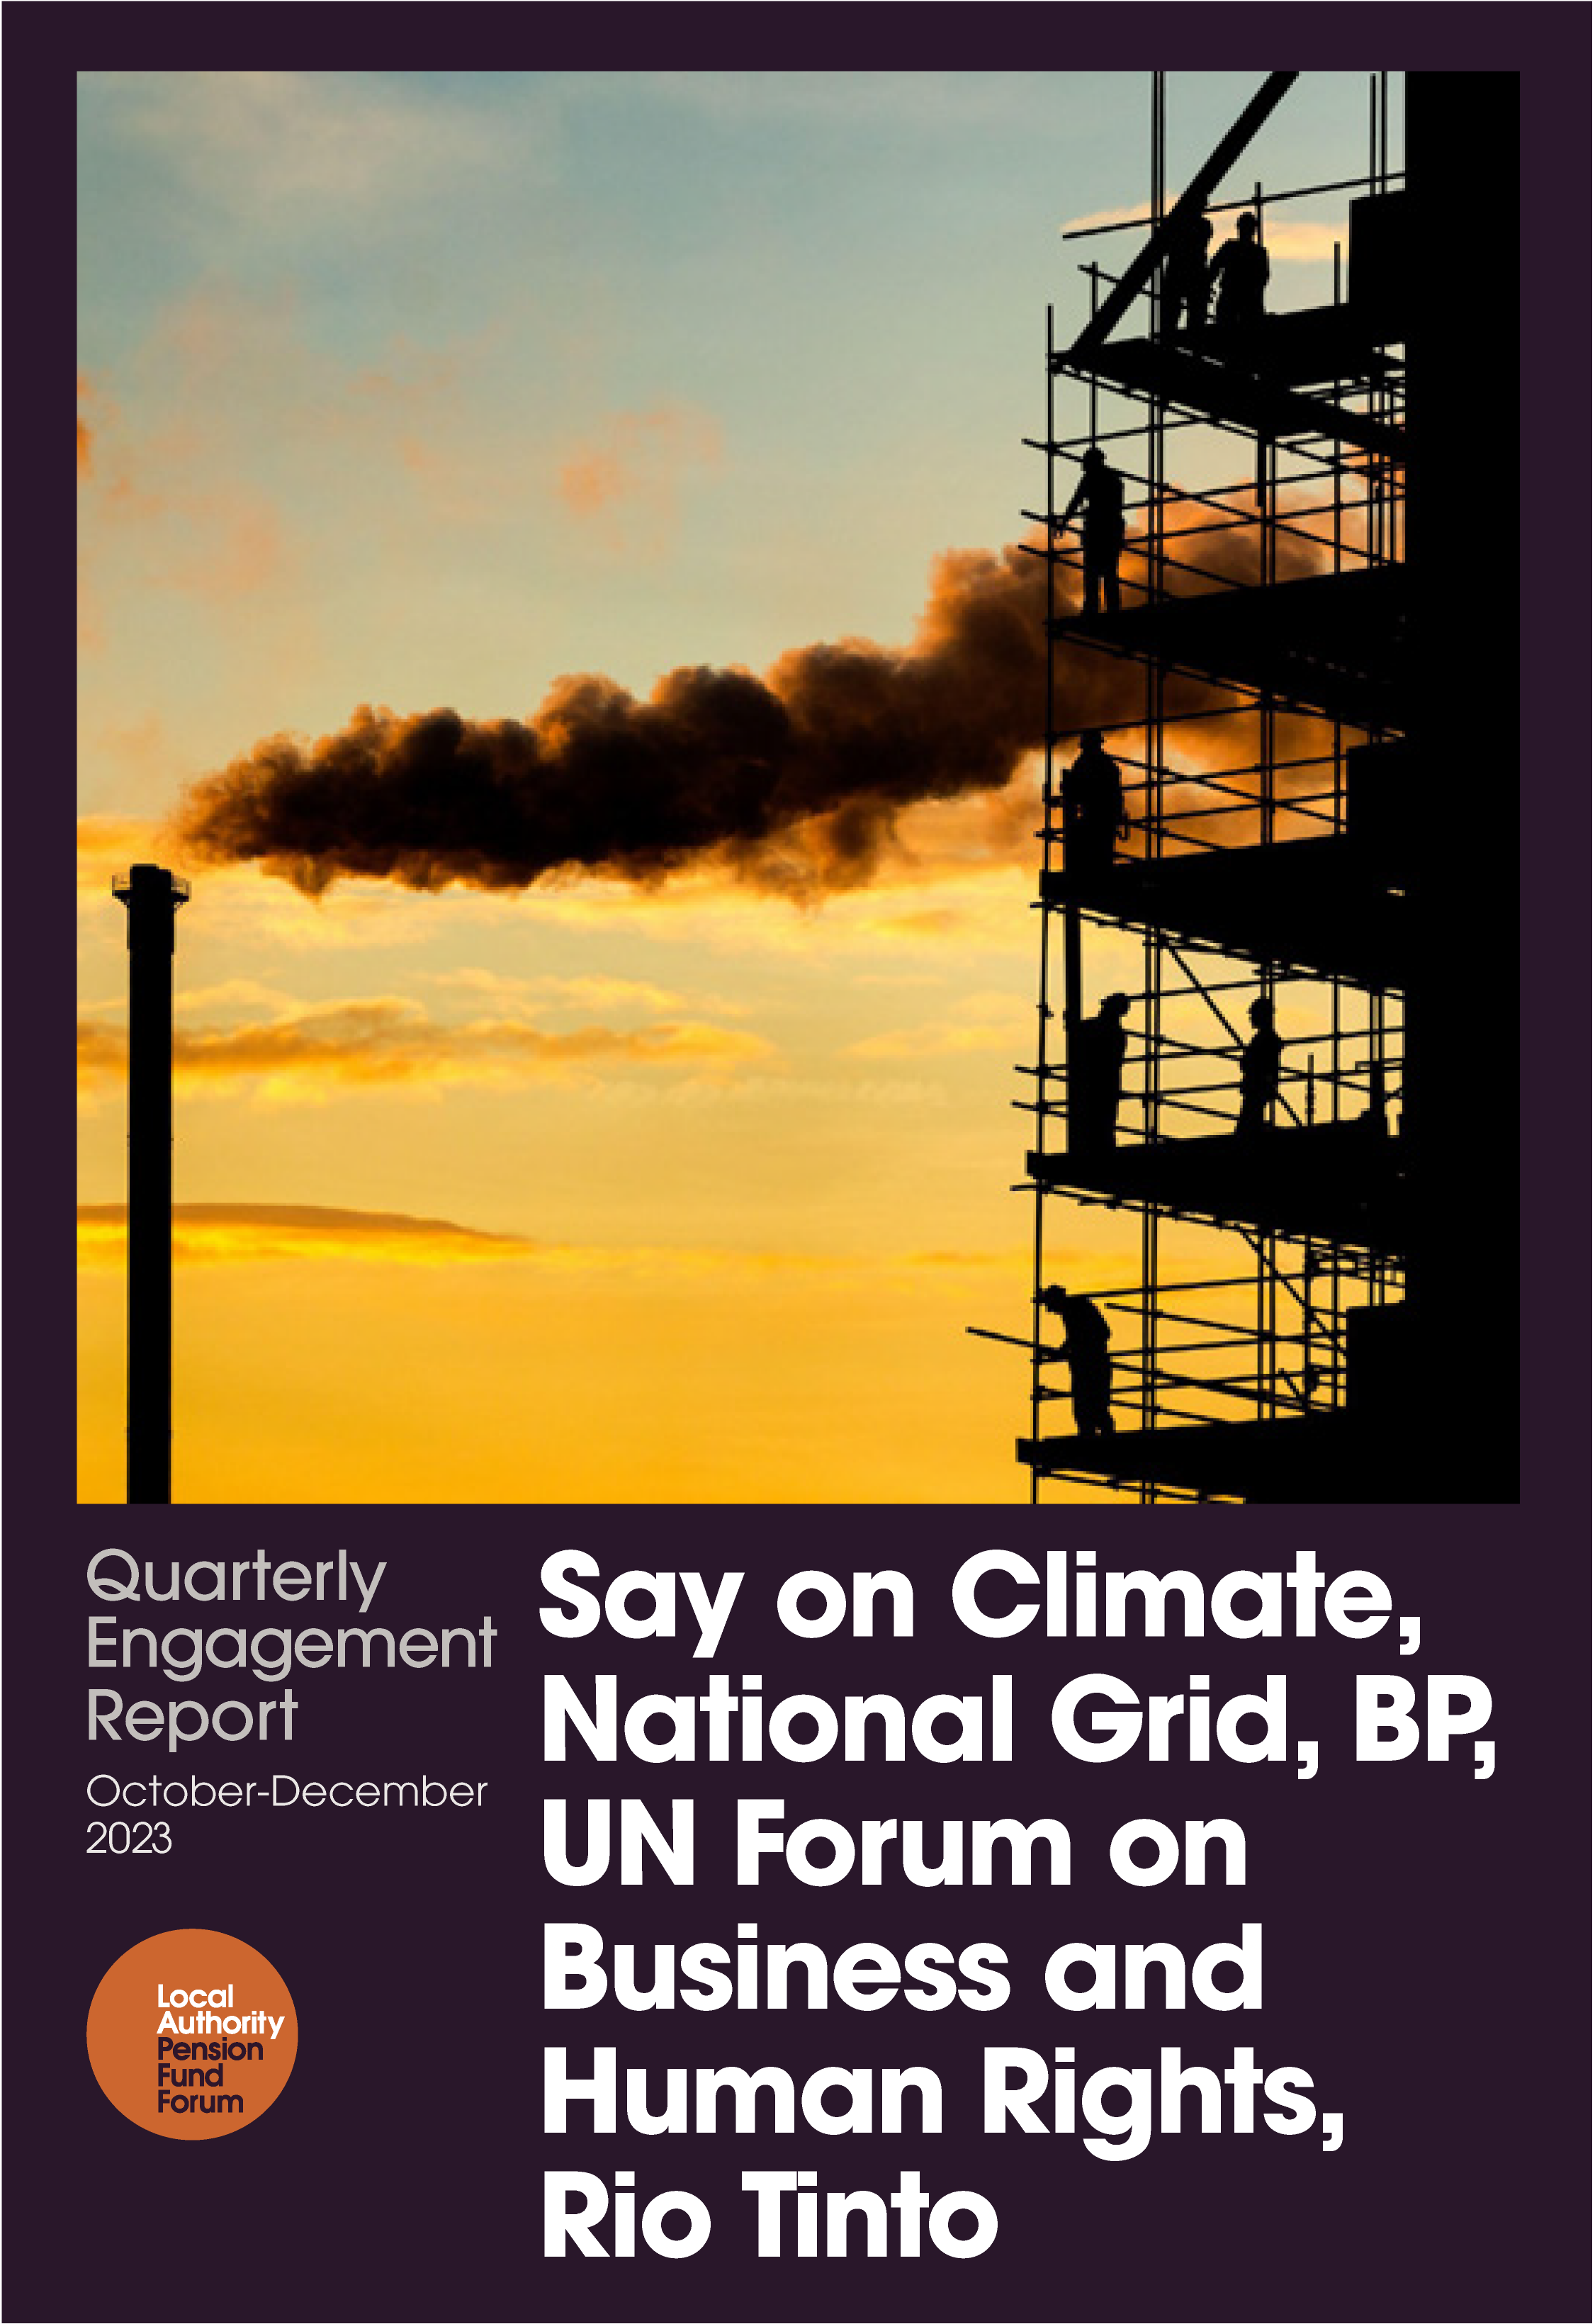 Cover of the quarterly report for Oct-Dec 2023 with an image of people on scaffolding with a chimney blowing smoke out towards them. They are all shilouetted by the sunrise behind them.